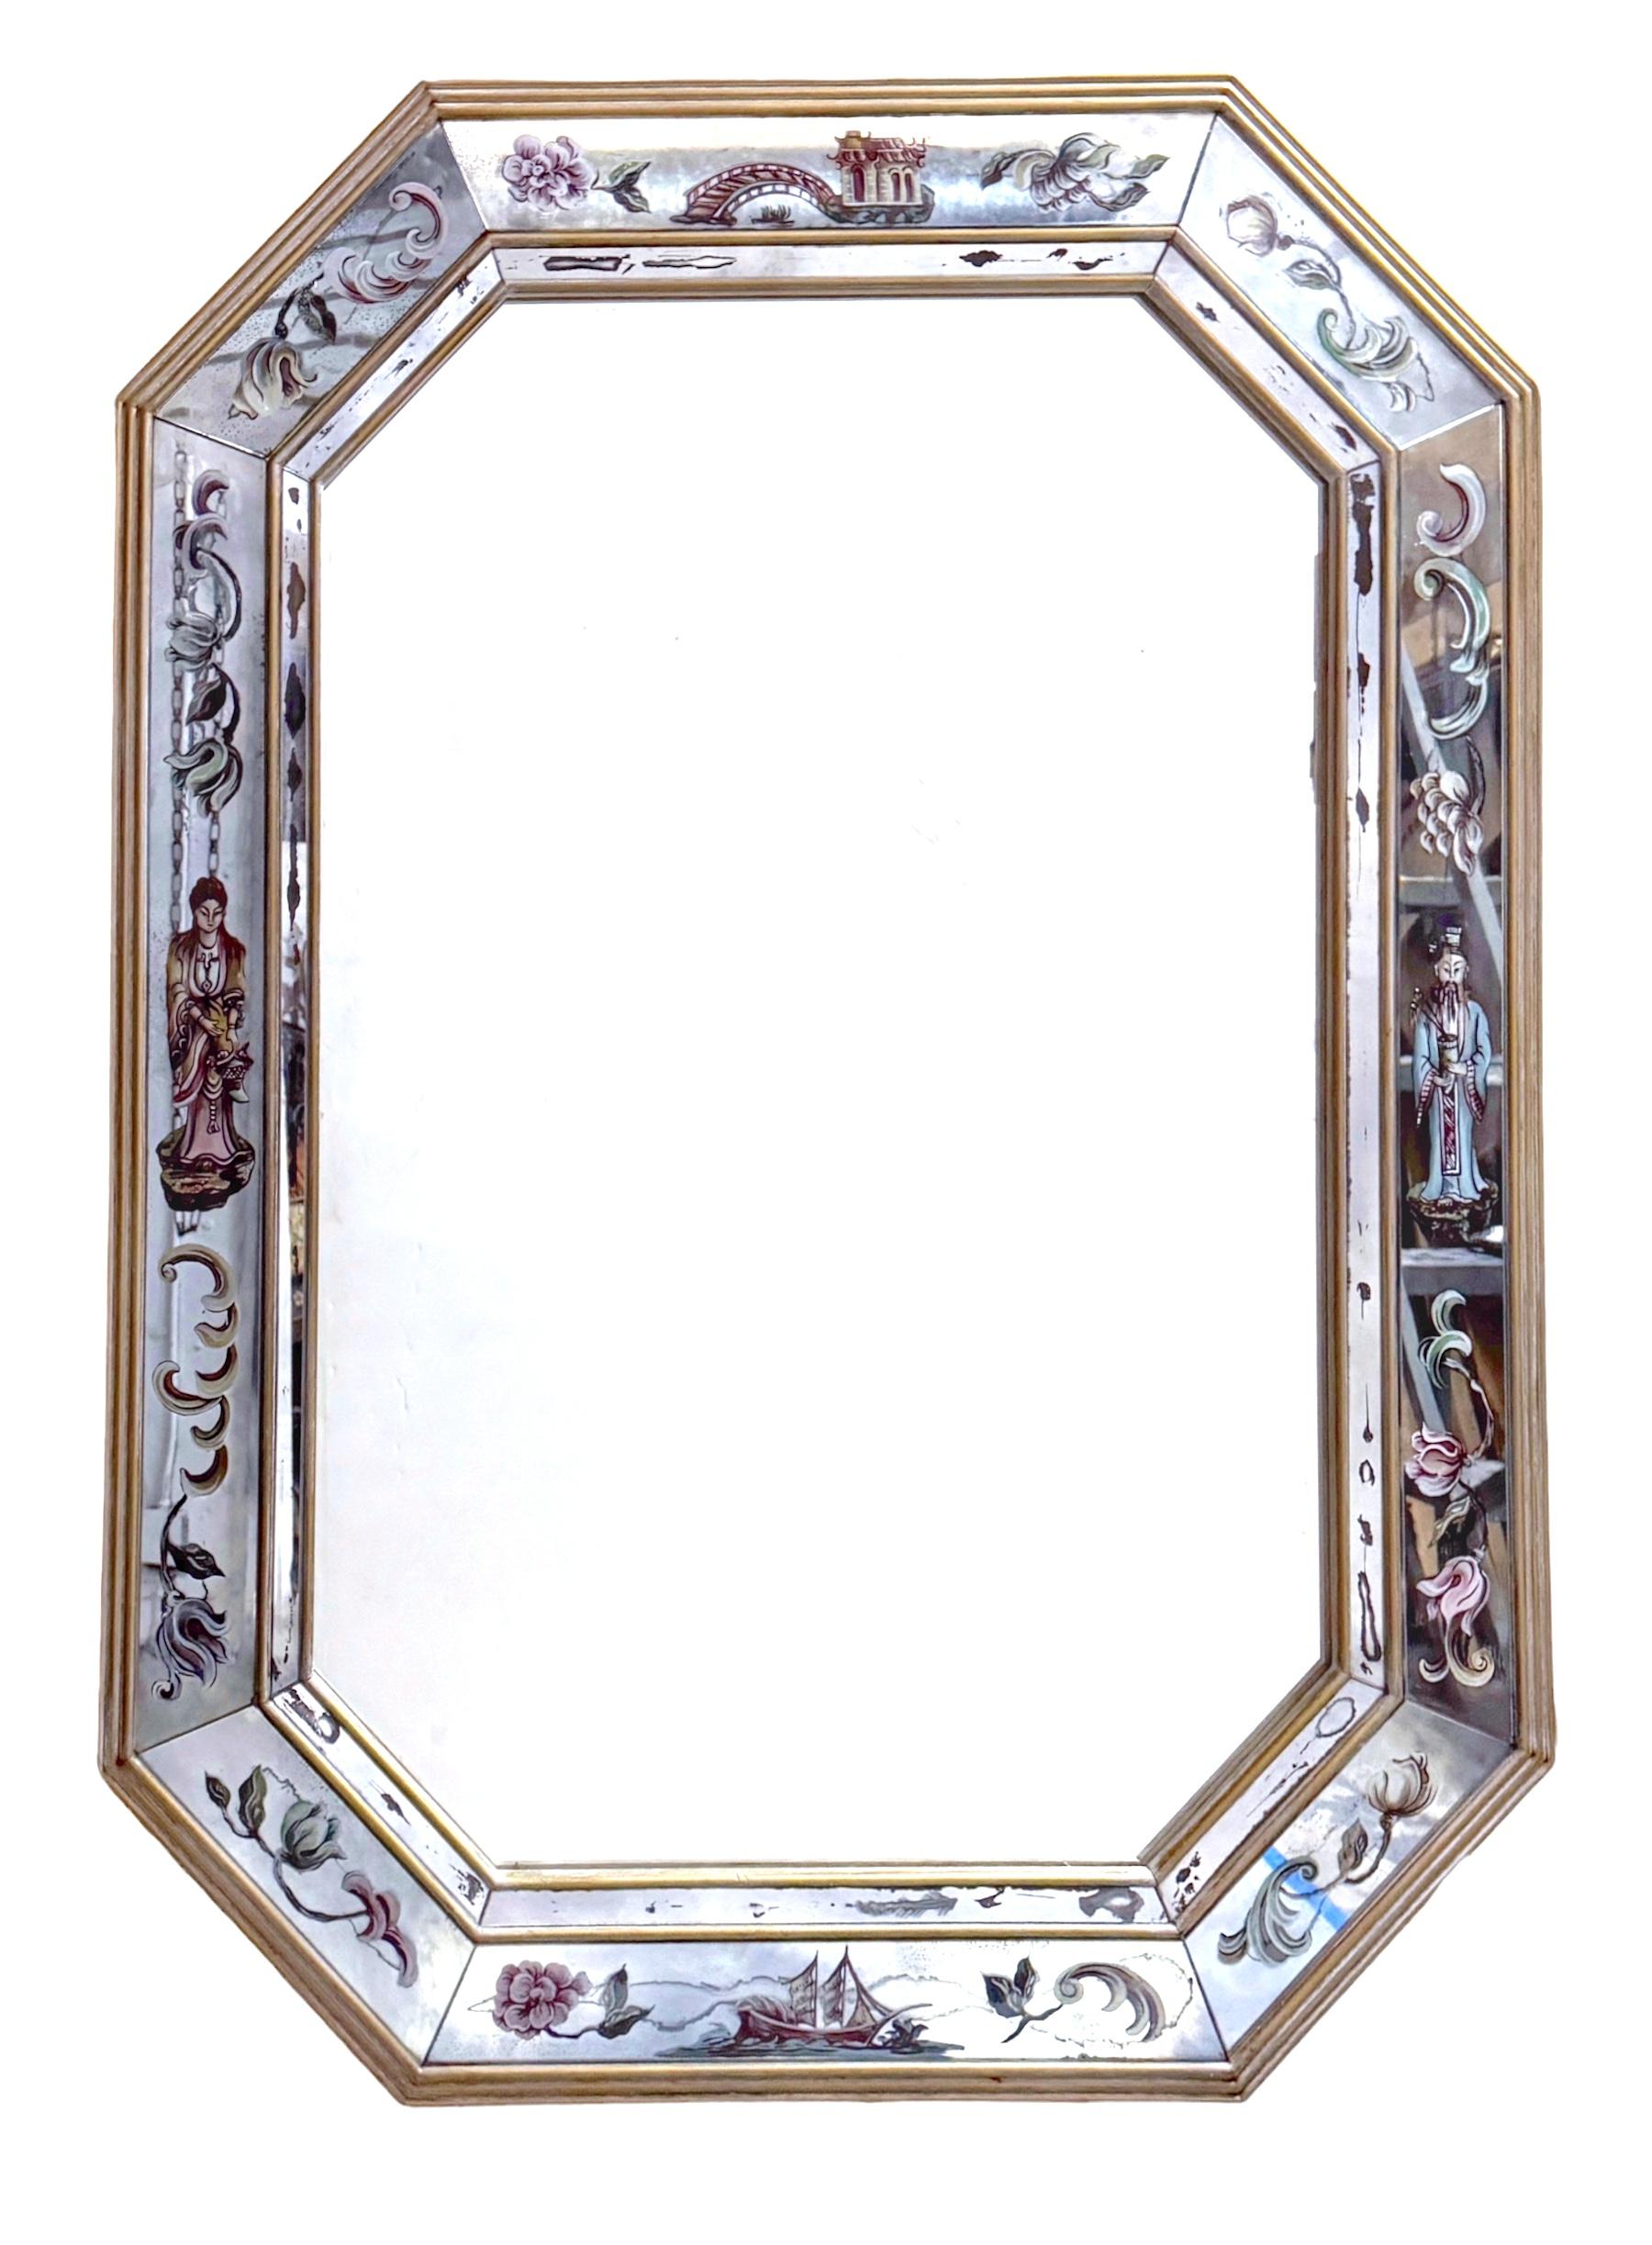 1950s Palm Beach Eglomise Chinoiserie Mirror

This exquisite Palm Beach eglomise chinoiserie mirror, a testament to Italian Hollywood Regency design tailored for the American market. Made in an alluring octagonal shape, its beauty  is the subtle